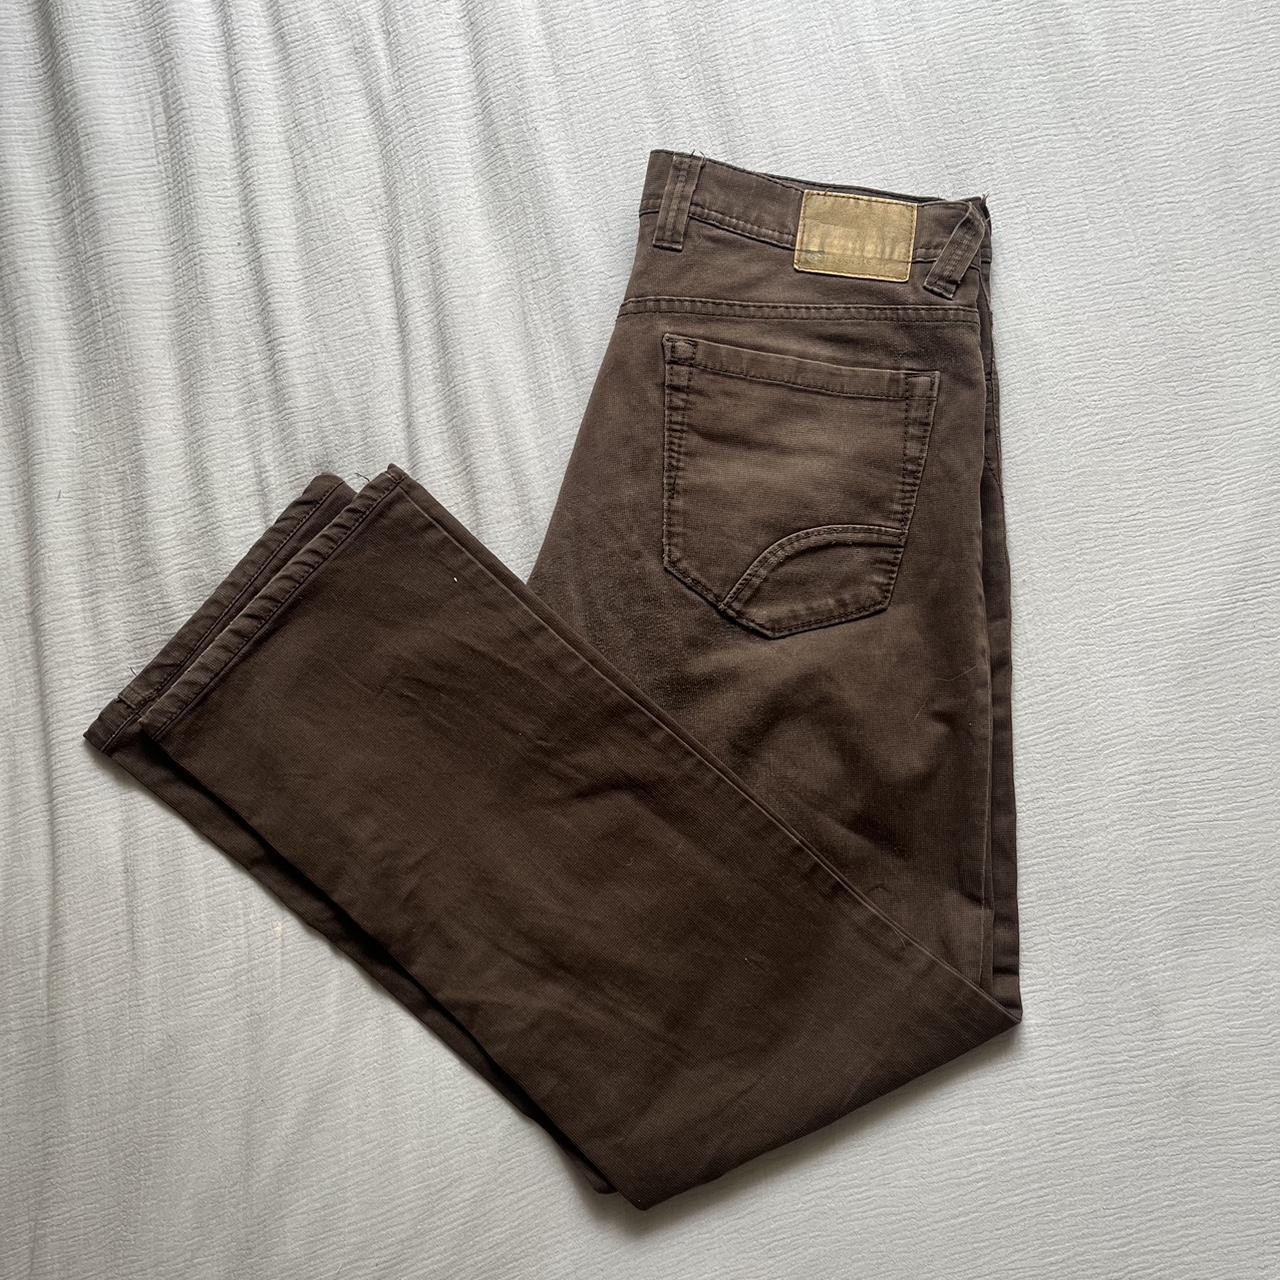 Brown straight leg jeans Brand casuals #brown #jeans - Depop